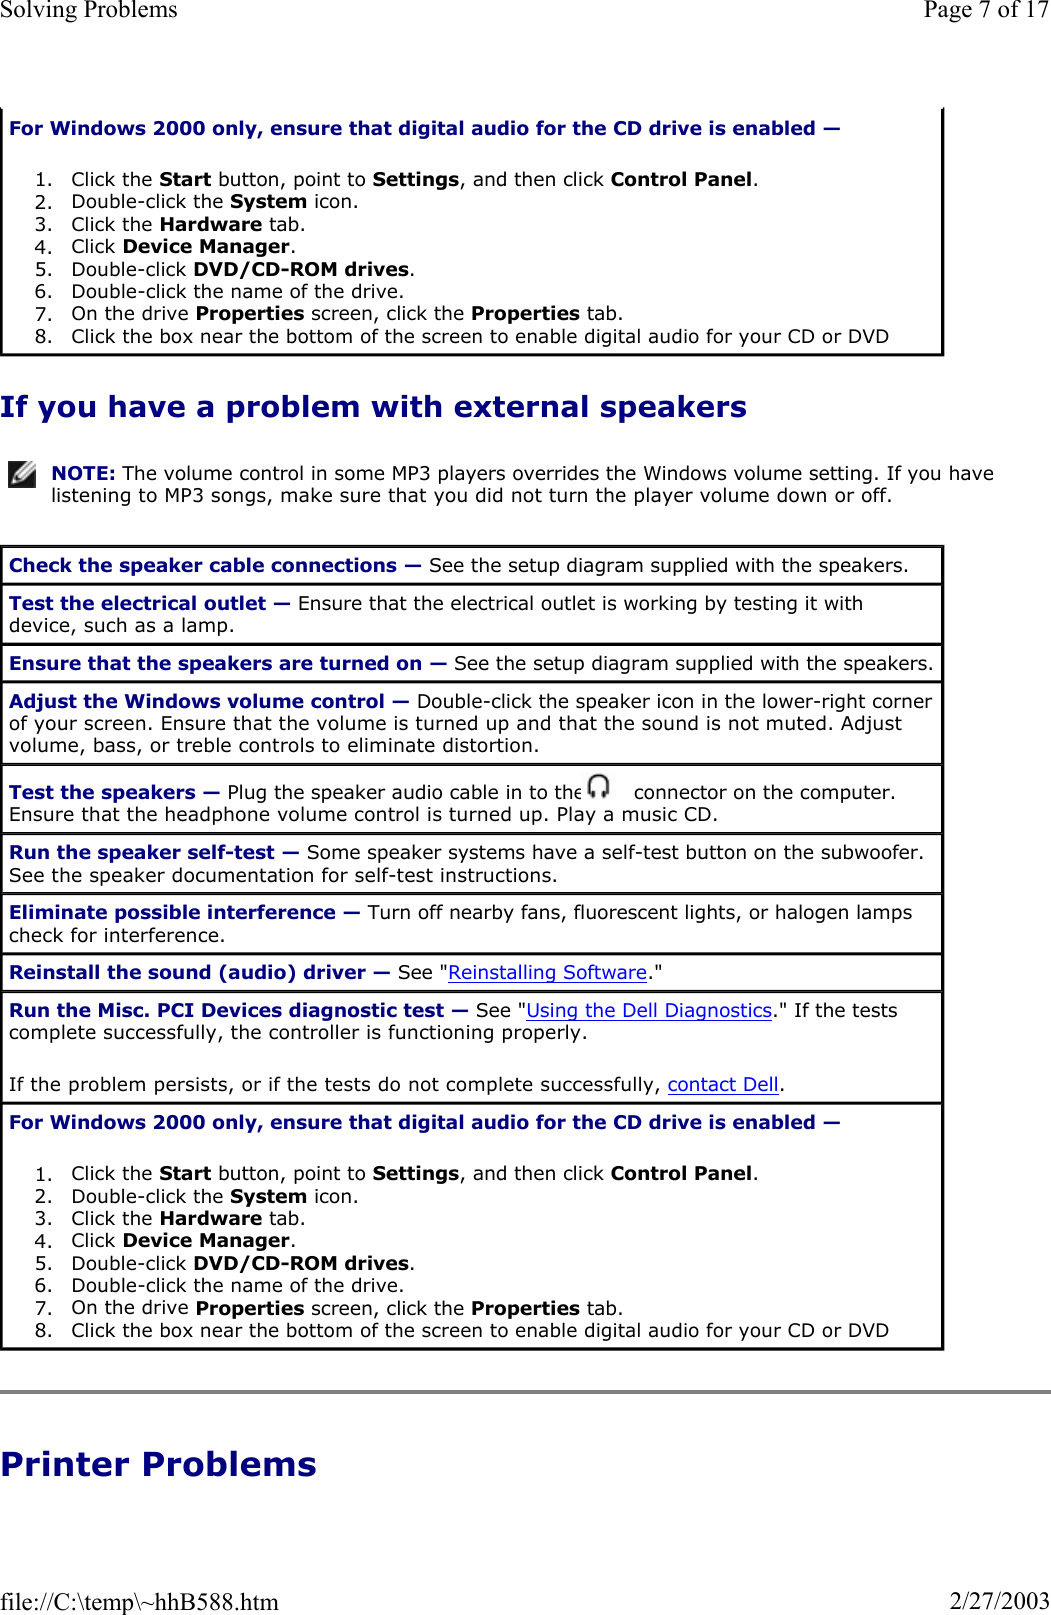 If you have a problem with external speakers Printer Problems For Windows 2000 only, ensure that digital audio for the CD drive is enabled —1. Click the Start button, point to Settings, and then click Control Panel.2. Double-click the System icon.  3. Click the Hardware tab.  4. Click Device Manager.5. Double-click DVD/CD-ROM drives.6. Double-click the name of the drive.  7. On the drive Properties screen, click the Properties tab.  8. Click the box near the bottom of the screen to enable digital audio for your CD or DVD NOTE: The volume control in some MP3 players overrides the Windows volume setting. If you have listening to MP3 songs, make sure that you did not turn the player volume down or off.Check the speaker cable connections — See the setup diagram supplied with the speakers. Test the electrical outlet — Ensure that the electrical outlet is working by testing it with device, such as a lamp. Ensure that the speakers are turned on — See the setup diagram supplied with the speakers. Adjust the Windows volume control — Double-click the speaker icon in the lower-right corner of your screen. Ensure that the volume is turned up and that the sound is not muted. Adjust volume, bass, or treble controls to eliminate distortion. Test the speakers — Plug the speaker audio cable in to the   connector on the computer. Ensure that the headphone volume control is turned up. Play a music CD. Run the speaker self-test — Some speaker systems have a self-test button on the subwoofer. See the speaker documentation for self-test instructions.  Eliminate possible interference — Turn off nearby fans, fluorescent lights, or halogen lamps check for interference. Reinstall the sound (audio) driver — See &quot;Reinstalling Software.&quot; Run the Misc. PCI Devices diagnostic test — See &quot;Using the Dell Diagnostics.&quot; If the tests complete successfully, the controller is functioning properly. If the problem persists, or if the tests do not complete successfully, contact Dell.For Windows 2000 only, ensure that digital audio for the CD drive is enabled —1. Click the Start button, point to Settings, and then click Control Panel.2. Double-click the System icon.  3. Click the Hardware tab.  4. Click Device Manager.5. Double-click DVD/CD-ROM drives.6. Double-click the name of the drive.  7. On the drive Properties screen, click the Properties tab.  8. Click the box near the bottom of the screen to enable digital audio for your CD or DVD Page 7 of 17Solving Problems2/27/2003file://C:\temp\~hhB588.htm